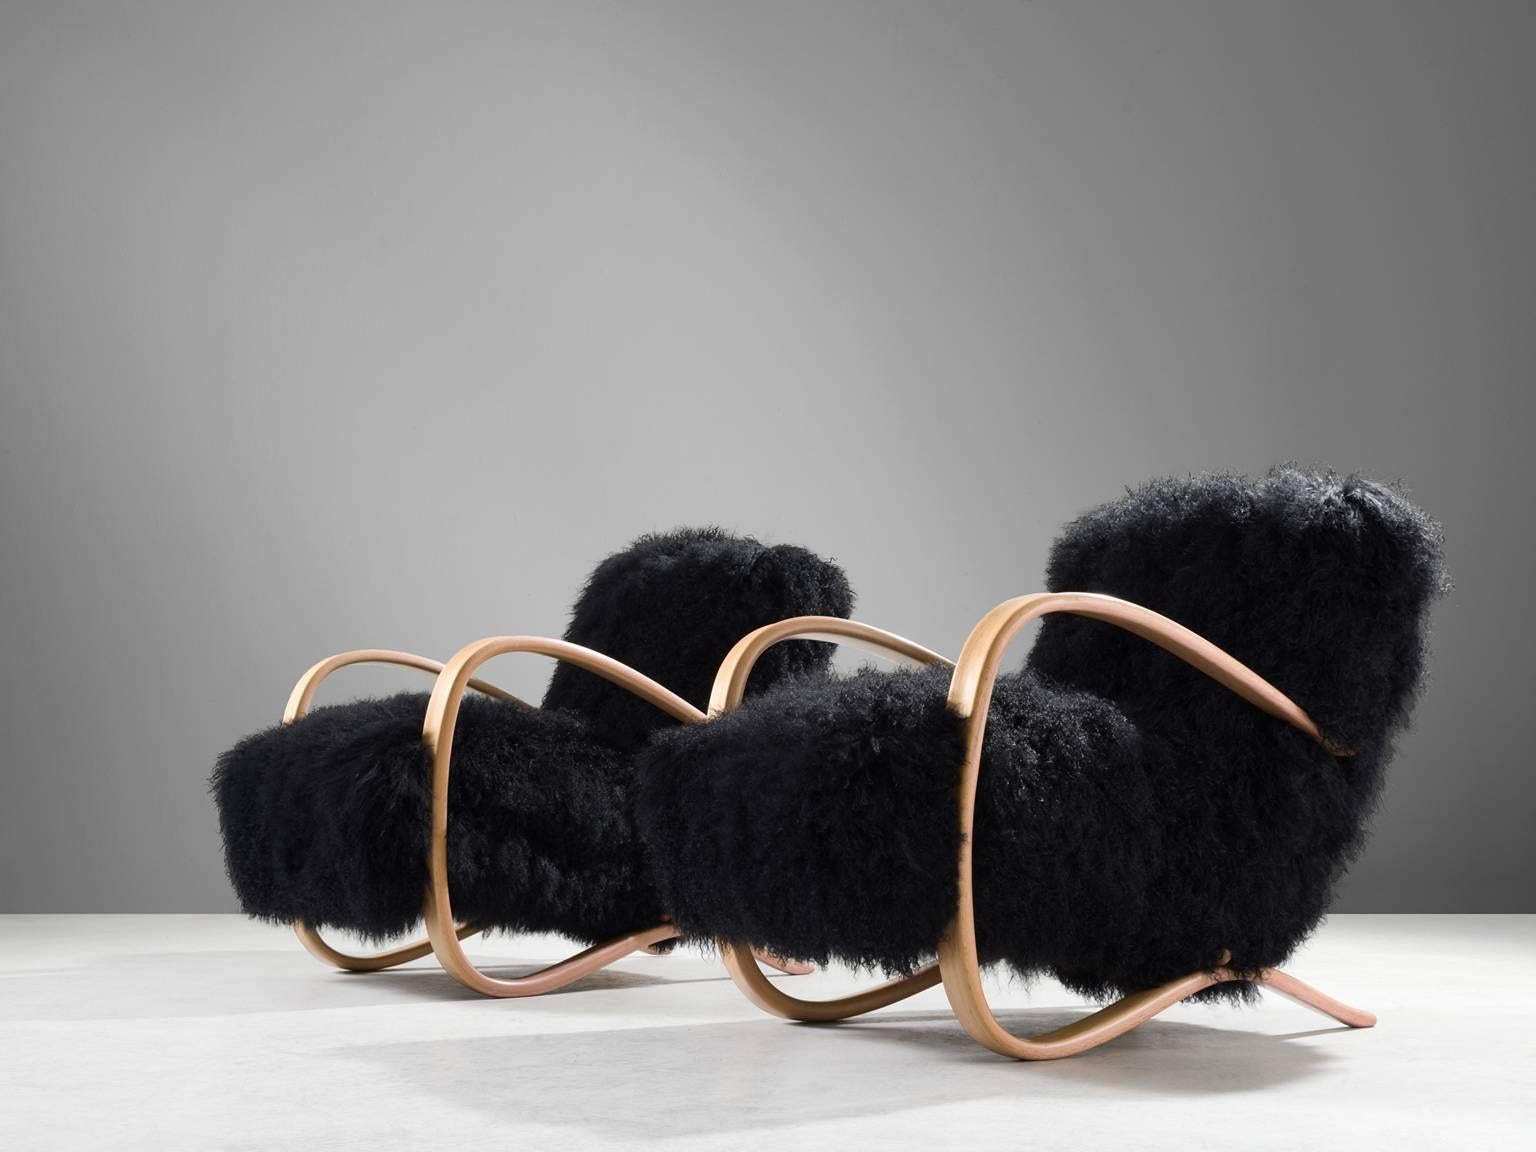 Pair of lounge chairs, in beech and sheepskin, by Jindrich Halabala, Czech Republic, 1930s.

Extraordinary pair of easy chairs with black Tibetan lambswool upholstery. These chairs have a very dynamic appearance. This fuzzy upholstery gives these